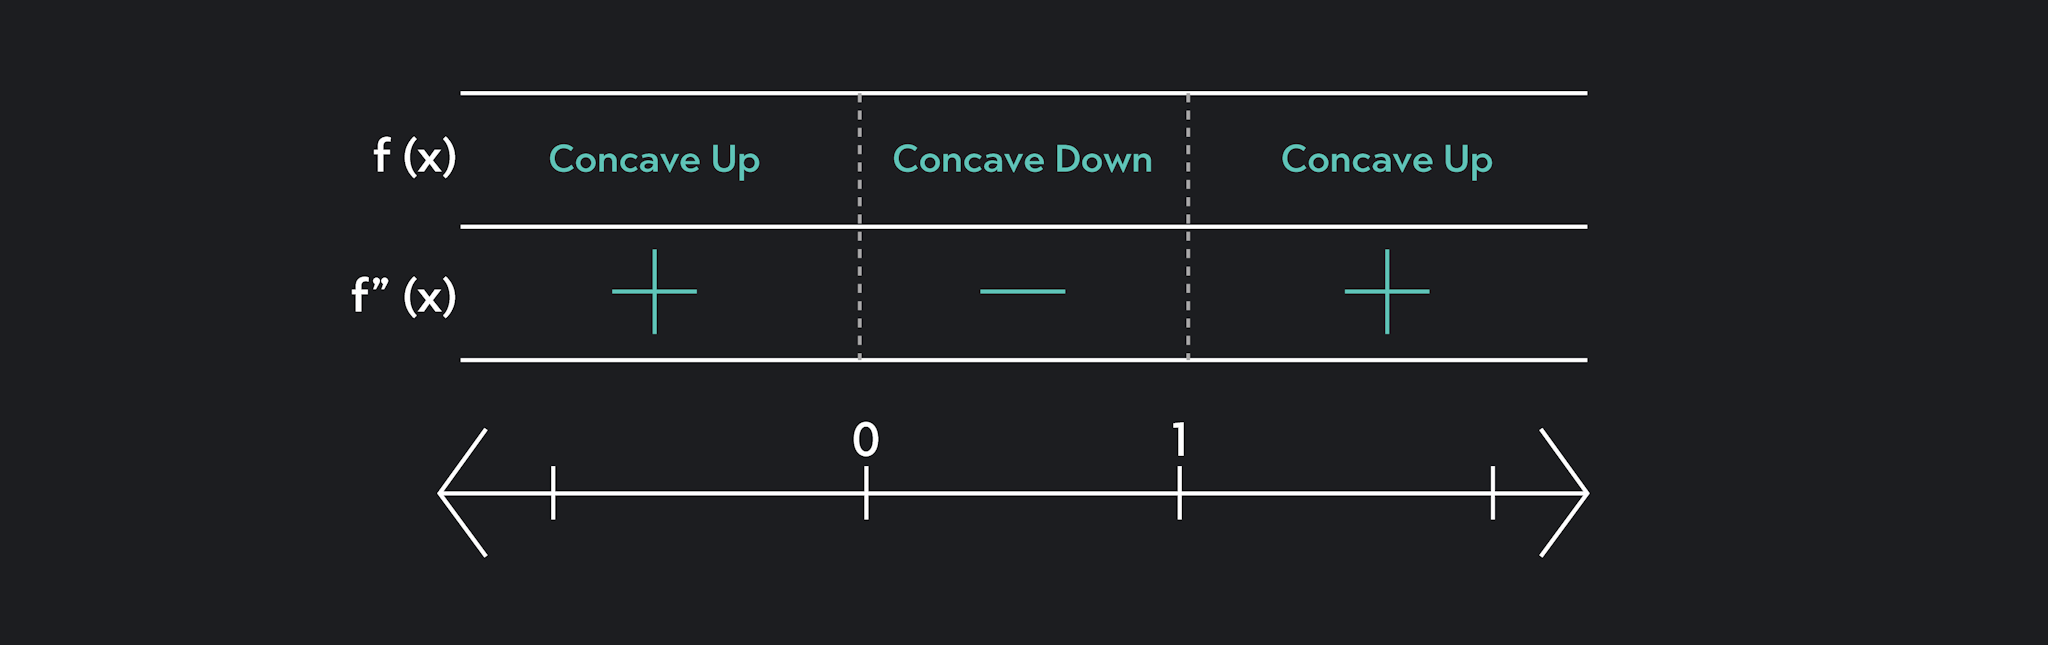 Table showing that f is concave up on the interval (- \infty, 0) and (1, \infty), and concave down on the interval (0, 1).